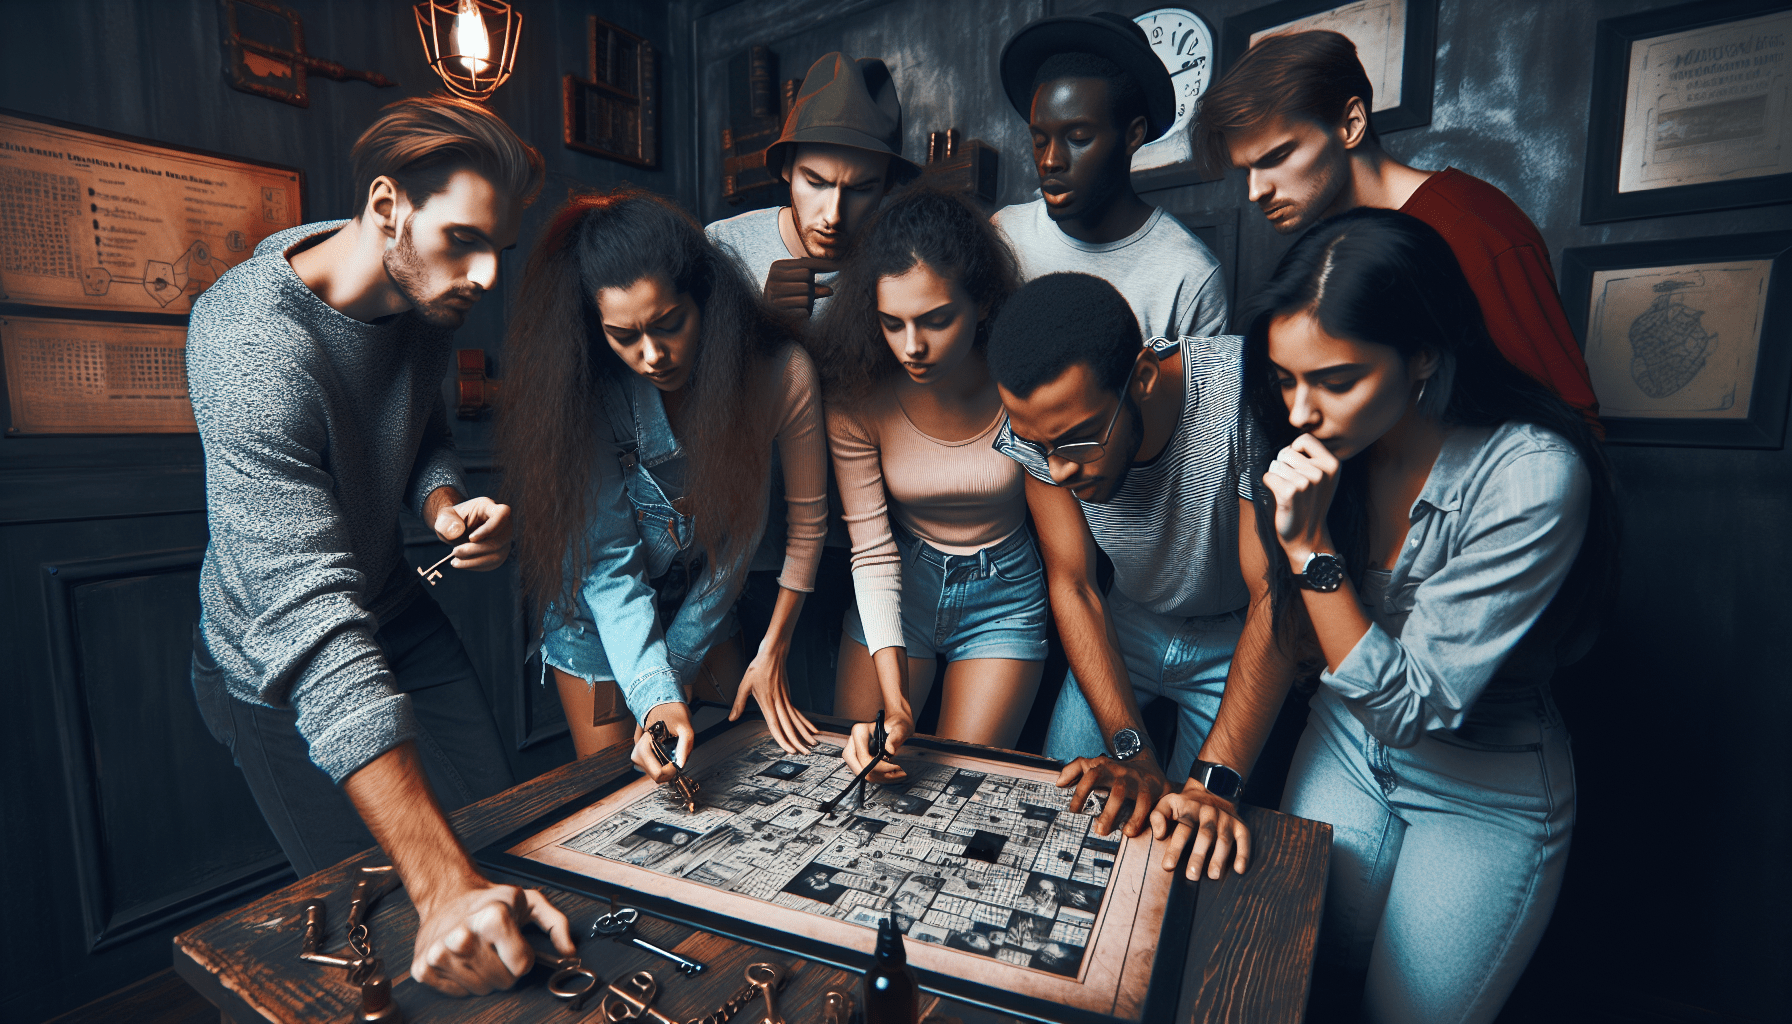 How Many People Should You Invite To An Escape Room?